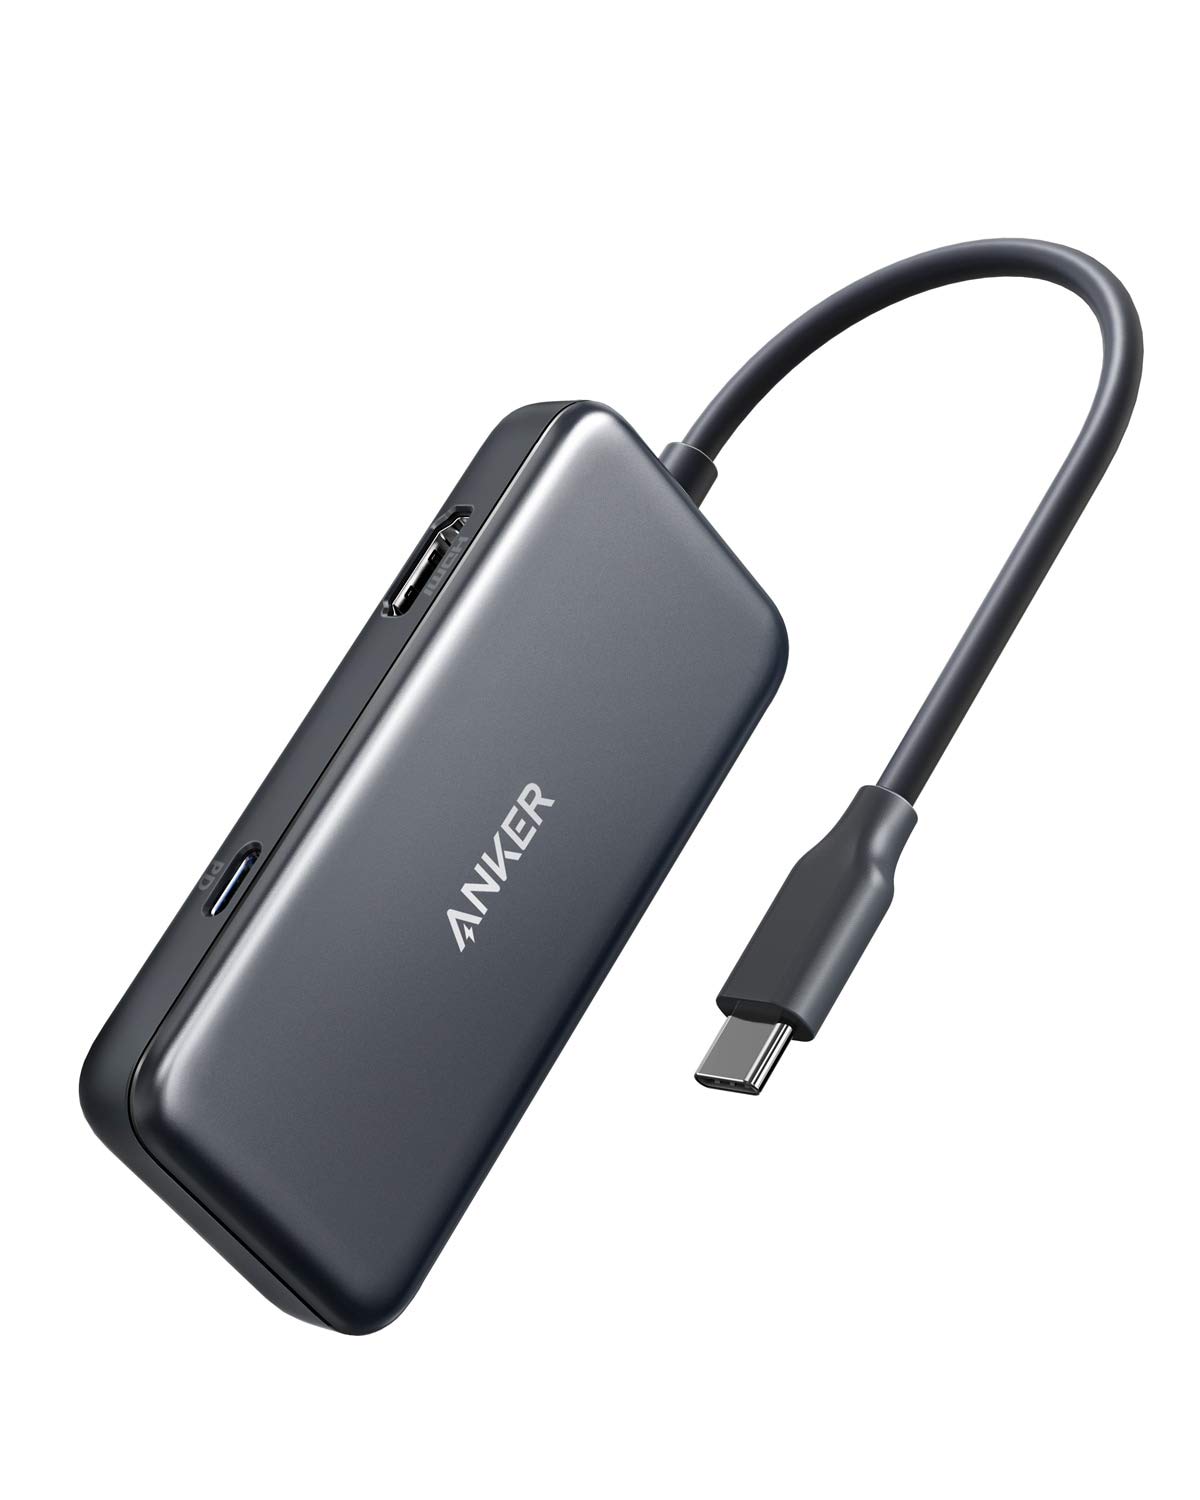 Maybe? The Anker USB-C hub had a tail that was too short.